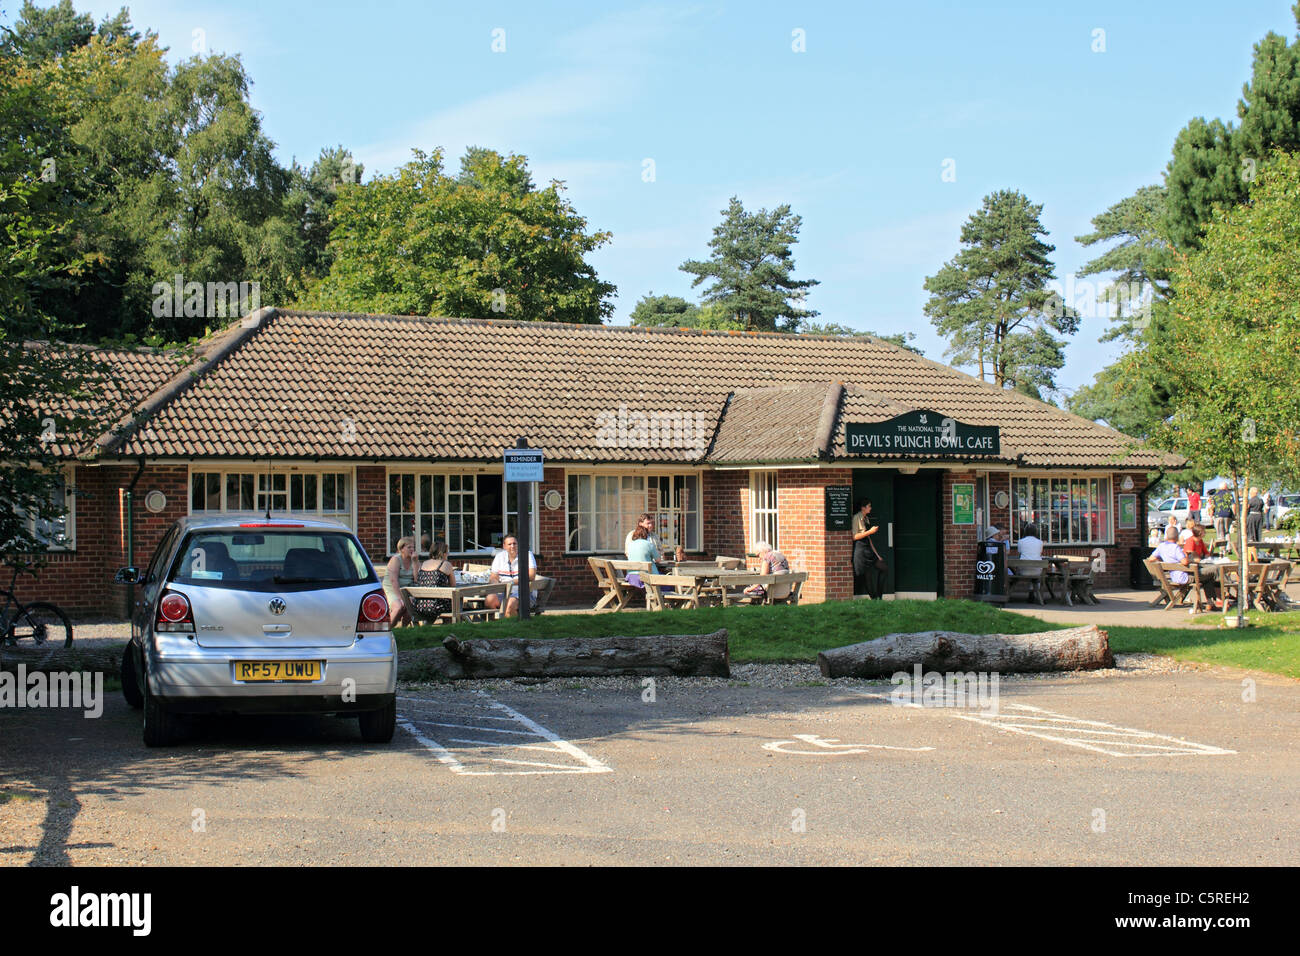 NT Devil's Punch Bowl Cafe, Hindhead Surrey in Inghilterra REGNO UNITO Foto Stock